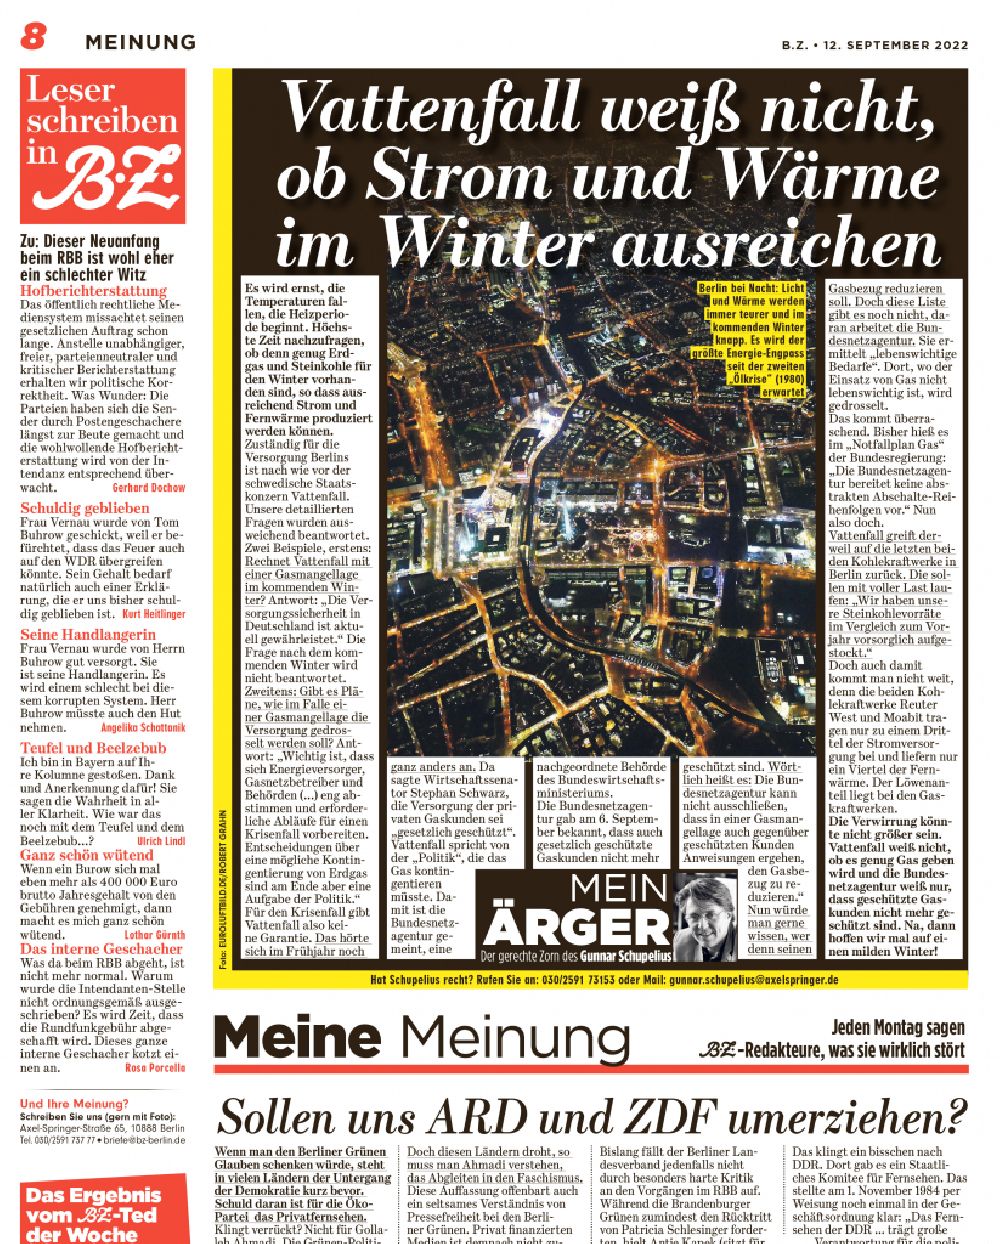 Berlin from the bird's eye view: Picture Section / media use of aerial use in the Newspaper - daily paper Energiekrise - Stromkrise BZ page 8, added to in the district Mitte in Berlin, Germany